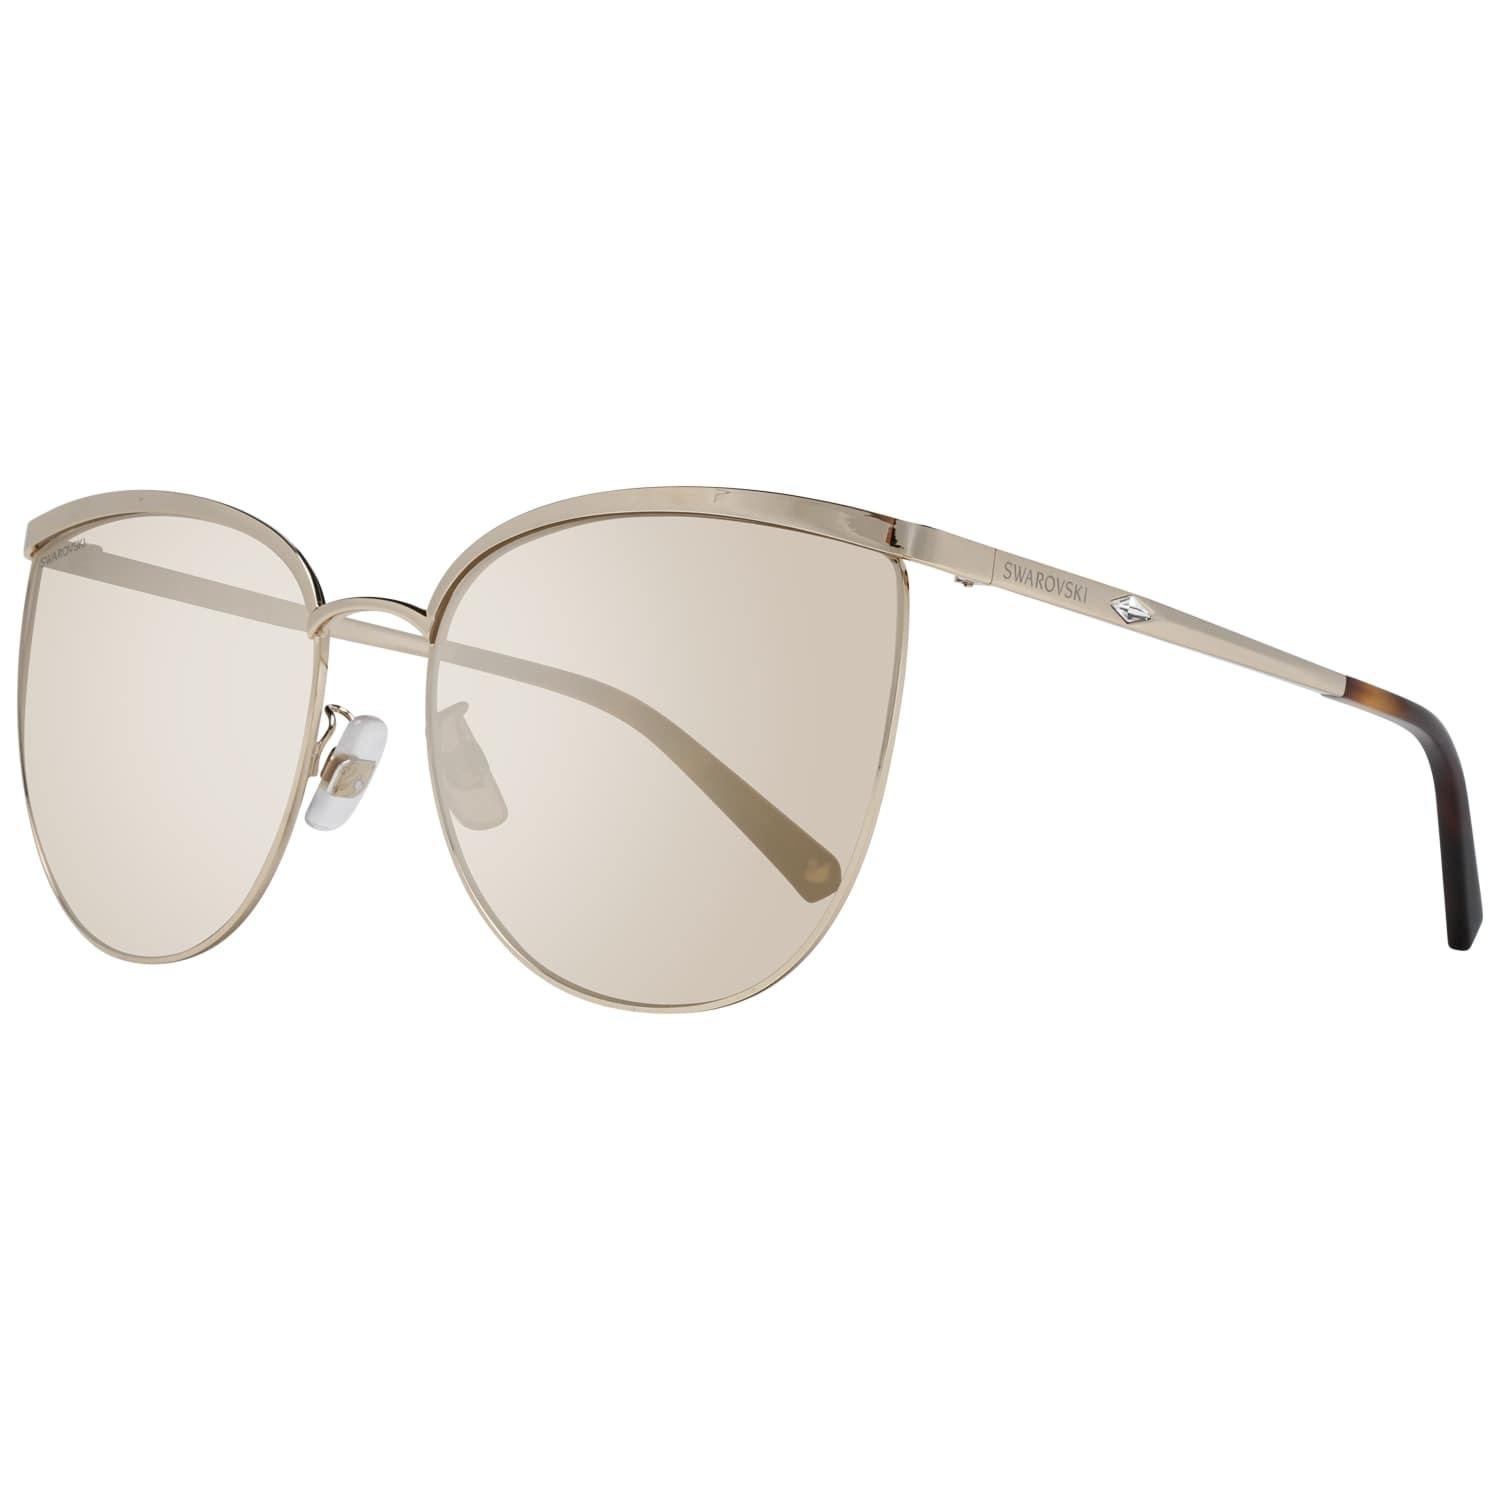 DetailsMATERIAL: MetalCOLOR: GoldMODEL: SK0250-K 6232GGENDER: WomenCOUNTRY OF MANUFACTURE: ChinaTYPE: SunglassesORIGINAL CASE?: YesSTYLE: OvalOCCASION: CasualFEATURES: LightweightLENS COLOR: BrownLENS TECHNOLOGY: MirroredYEAR MANUFACTURED: